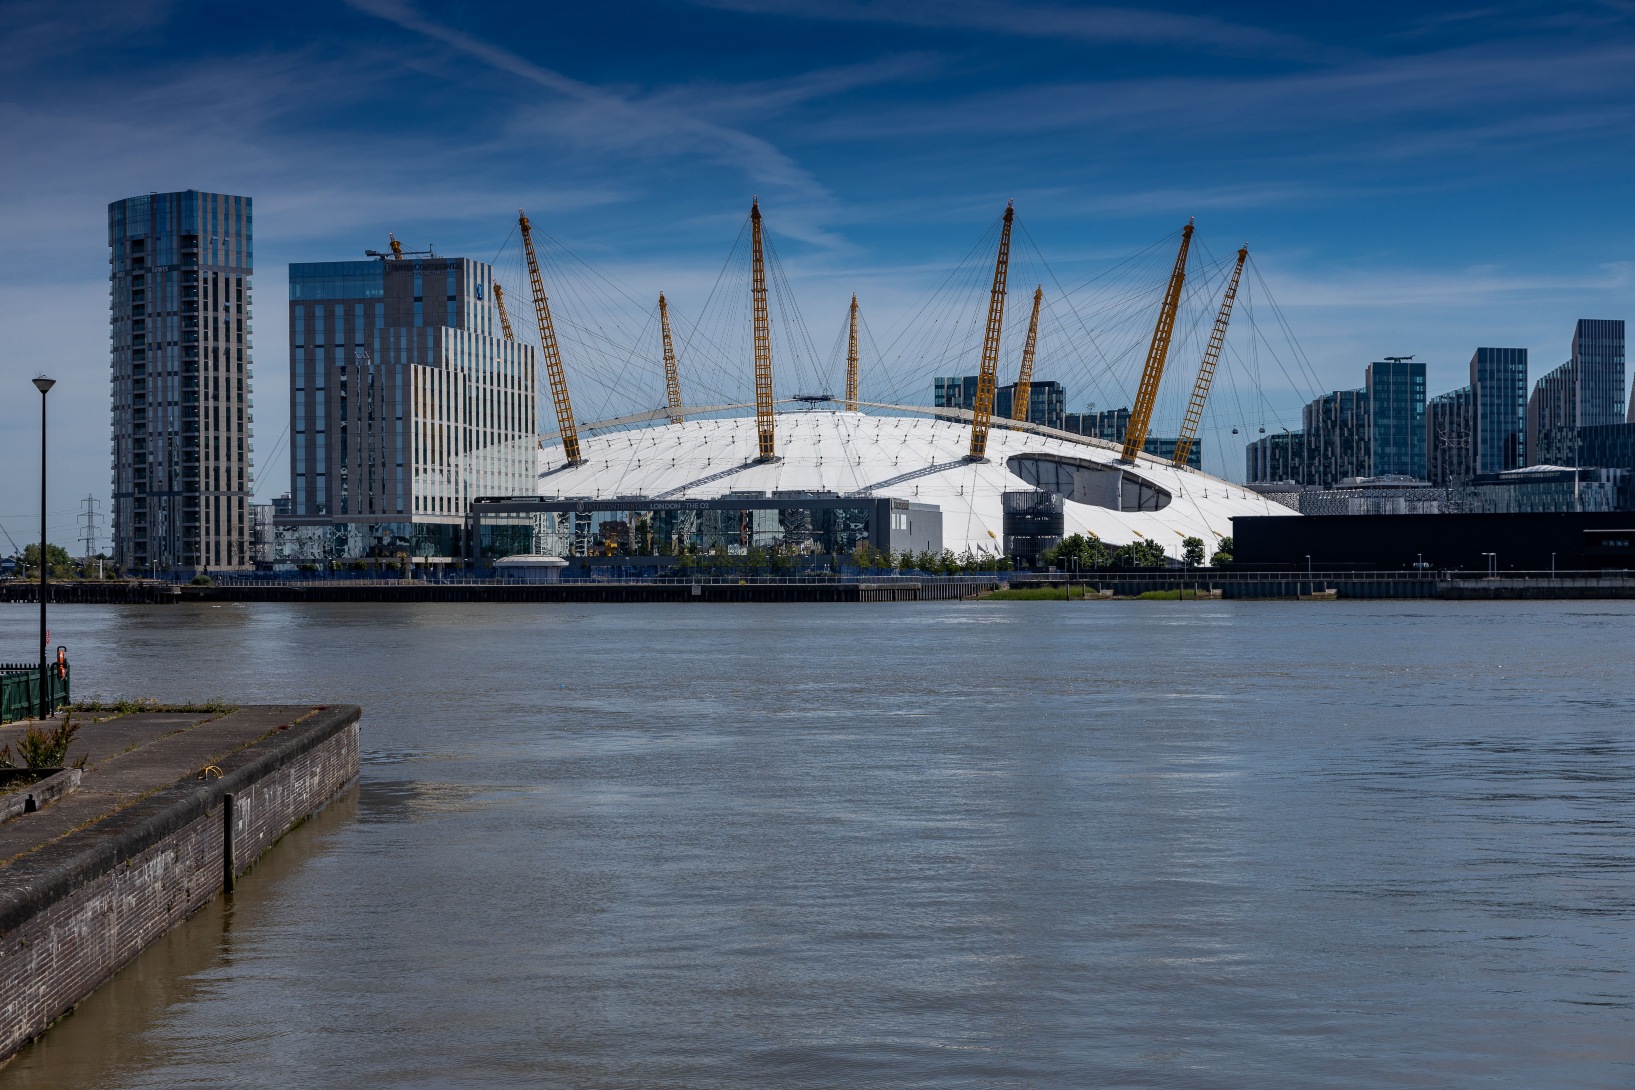 Exterior daytime photo across the River Thames towards theO2 arena and shopping outlet near Hampton Tower, South Quay Plaza